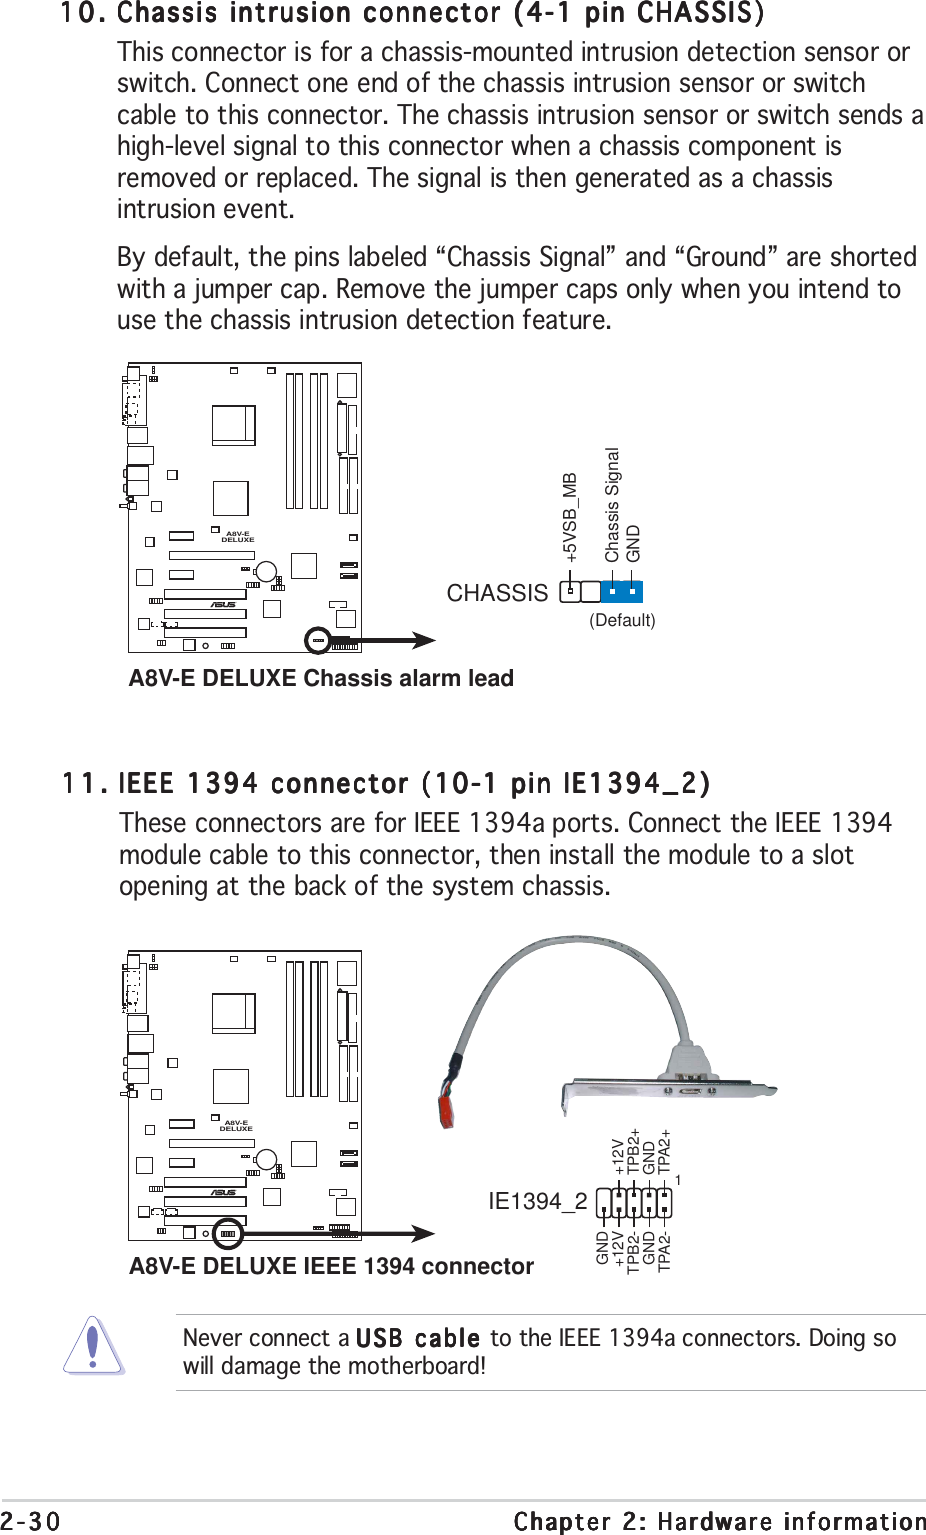 2-302-302-302-302-30 Chapter 2: Hardware informationChapter 2: Hardware informationChapter 2: Hardware informationChapter 2: Hardware informationChapter 2: Hardware information10.10.10.10.10. Chassis intrusion connector (4-1 pin CHASSIS)Chassis intrusion connector (4-1 pin CHASSIS)Chassis intrusion connector (4-1 pin CHASSIS)Chassis intrusion connector (4-1 pin CHASSIS)Chassis intrusion connector (4-1 pin CHASSIS)This connector is for a chassis-mounted intrusion detection sensor orswitch. Connect one end of the chassis intrusion sensor or switchcable to this connector. The chassis intrusion sensor or switch sends ahigh-level signal to this connector when a chassis component isremoved or replaced. The signal is then generated as a chassisintrusion event.By default, the pins labeled “Chassis Signal” and “Ground” are shortedwith a jumper cap. Remove the jumper caps only when you intend touse the chassis intrusion detection feature.A8V-EDELUXE®A8V-E DELUXE Chassis alarm leadCHASSIS+5VSB_MBChassis SignalGND(Default)Never connect a USB cable USB cable USB cable USB cable USB cable to the IEEE 1394a connectors. Doing sowill damage the motherboard!11.11.11.11.11. IEEE 1394 connector (10-1 pin IE1394_2)IEEE 1394 connector (10-1 pin IE1394_2)IEEE 1394 connector (10-1 pin IE1394_2)IEEE 1394 connector (10-1 pin IE1394_2)IEEE 1394 connector (10-1 pin IE1394_2)These connectors are for IEEE 1394a ports. Connect the IEEE 1394module cable to this connector, then install the module to a slotopening at the back of the system chassis.A8V-EDELUXE®A8V-E DELUXE IEEE 1394 connectorIE1394_2 1GND+12VTPB2-GNDTPA2-+12VTPB2+GNDTPA2+